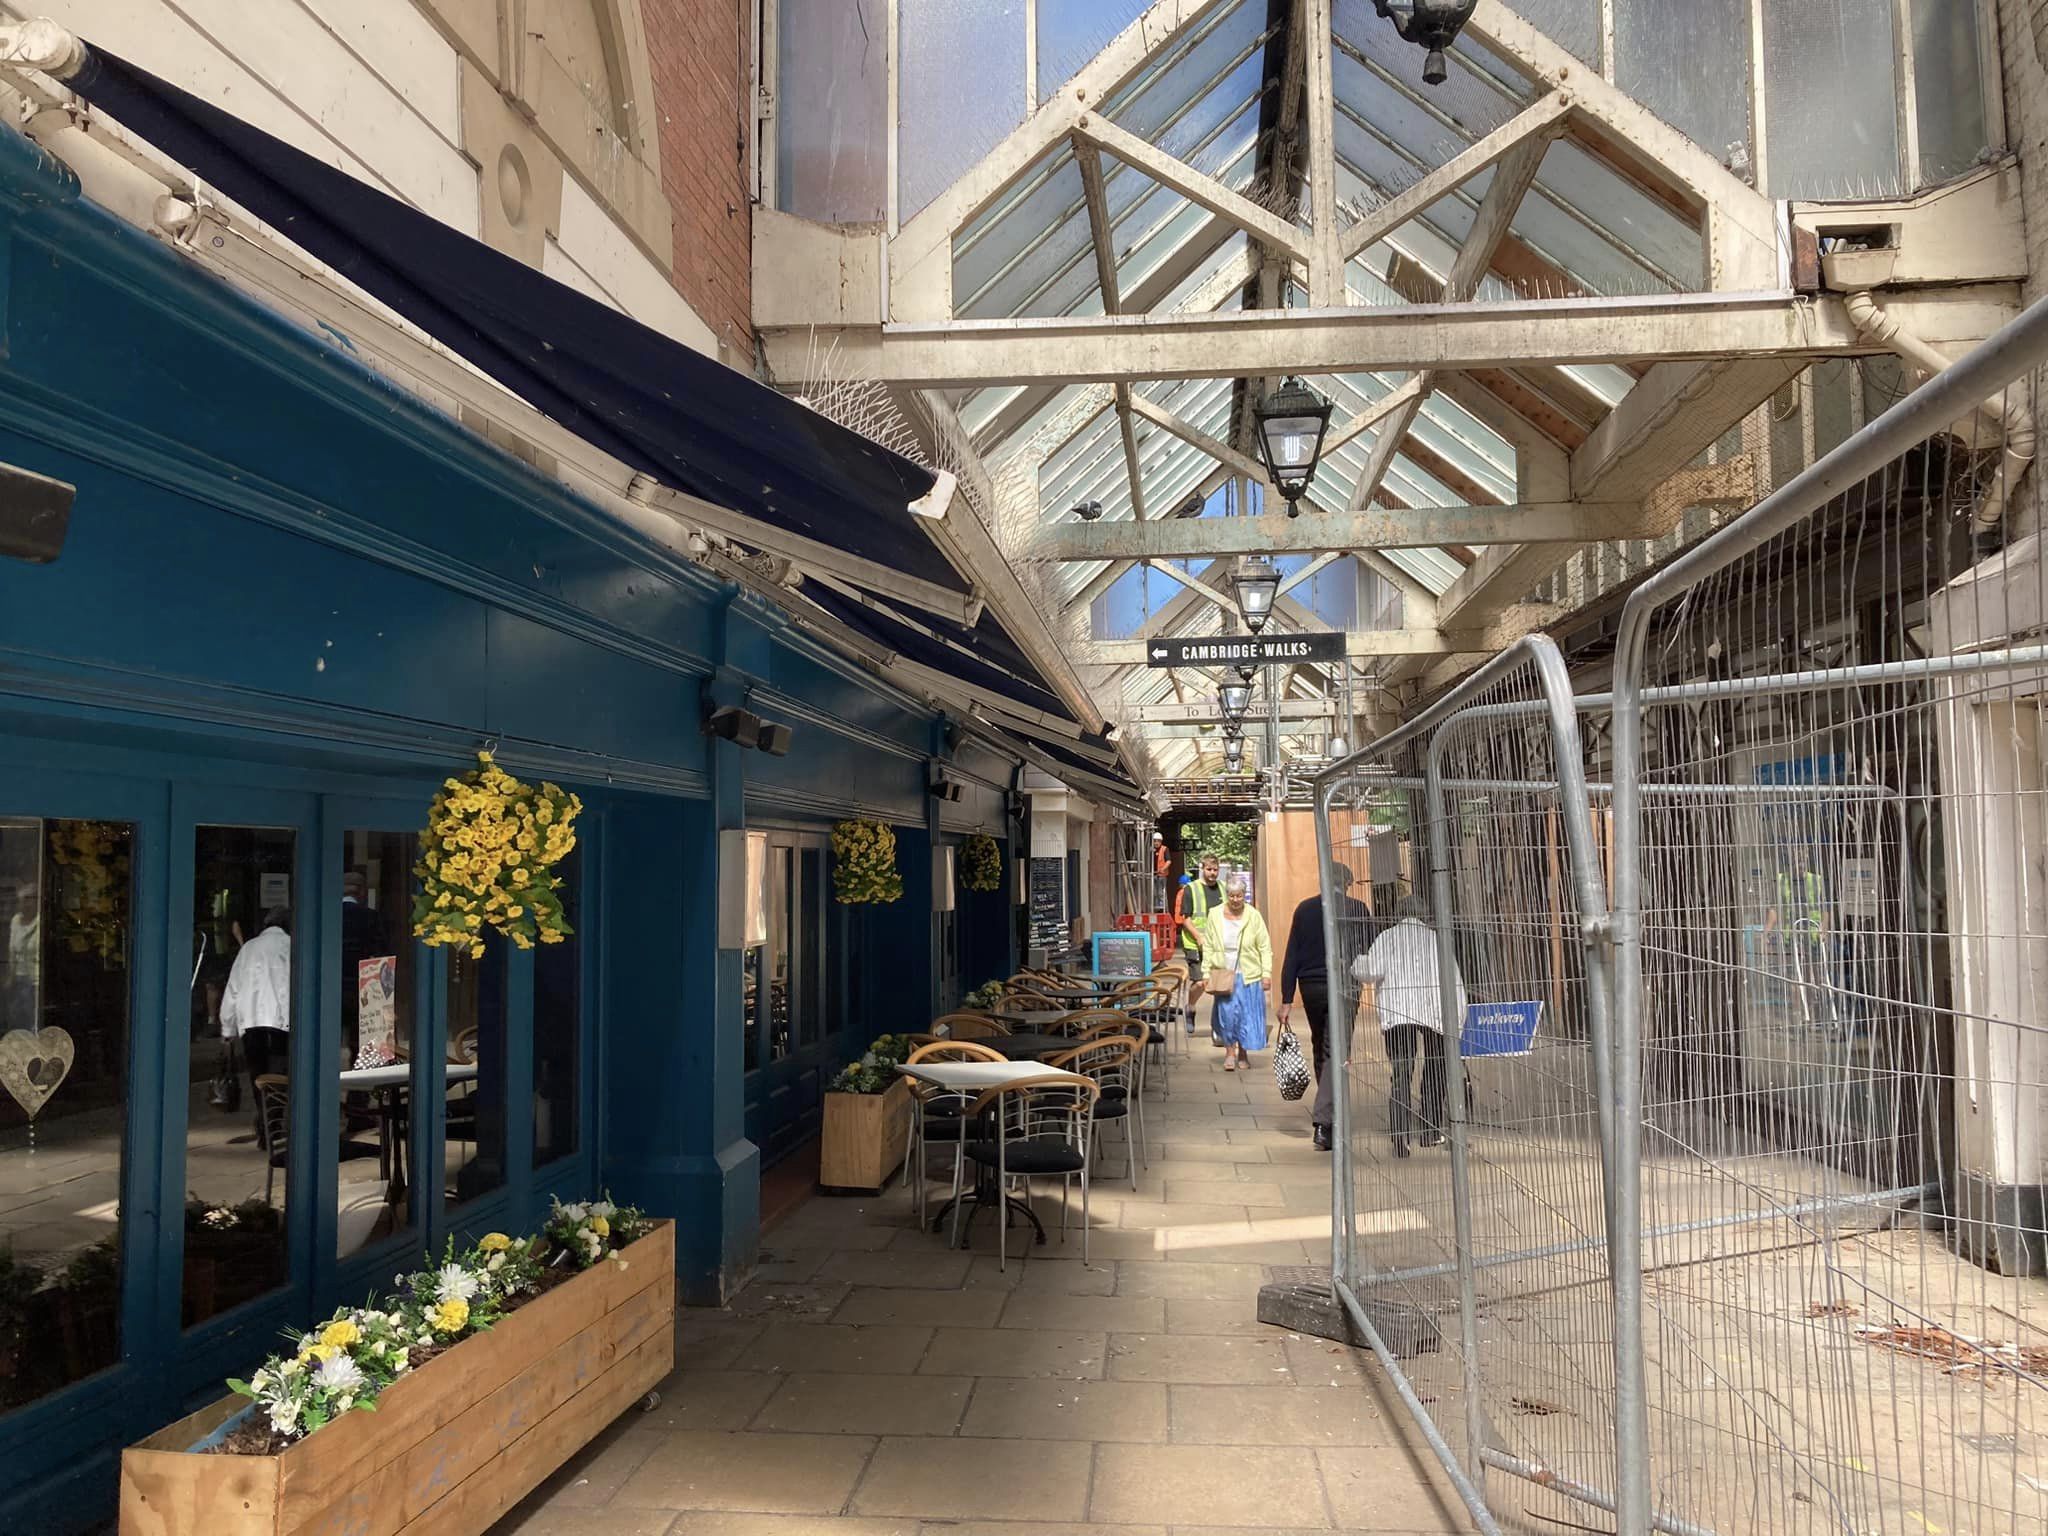 Work is taking place to repair and restore Cambridge Arcade in Southport. Photo by Andrew Brown Stand Up For Southpor